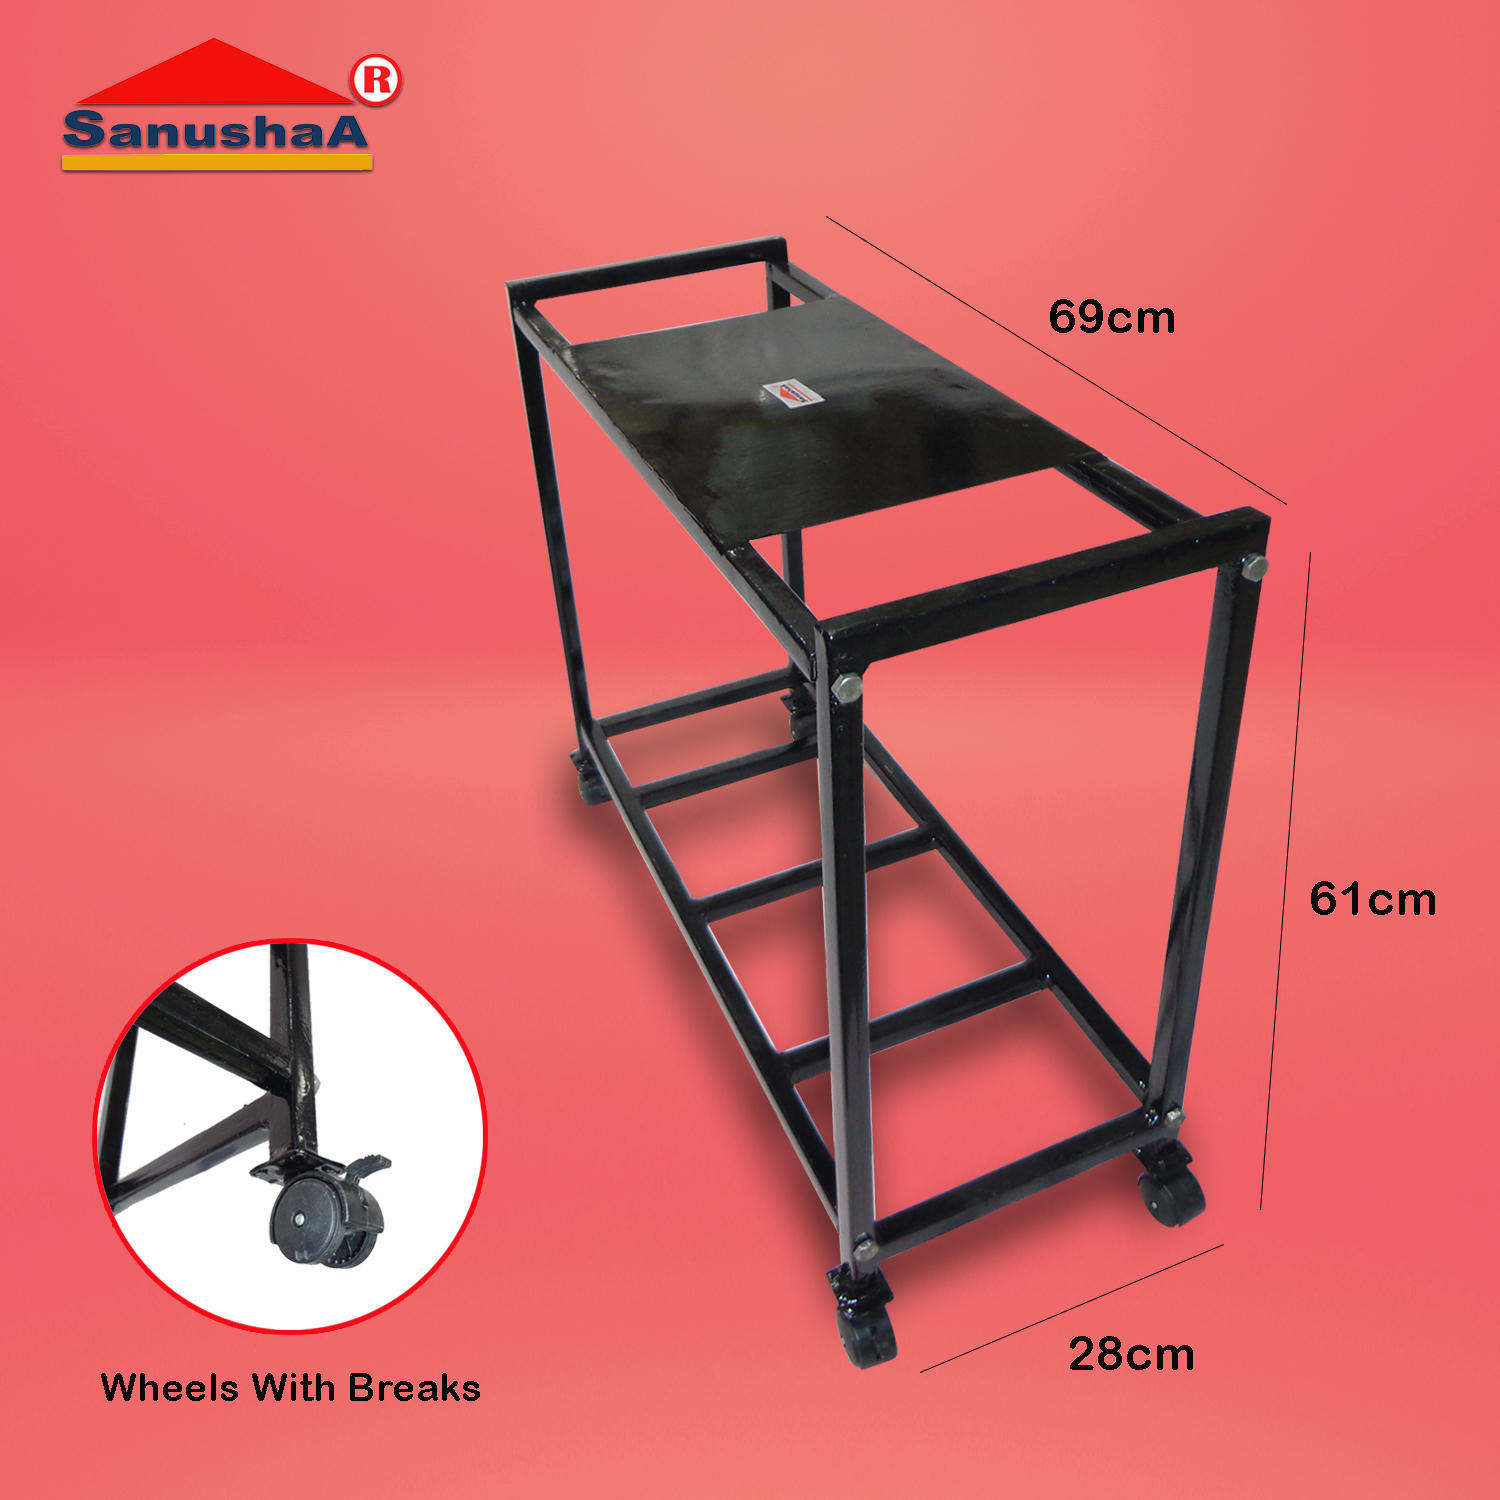 Sanushaa Inverter Metal Trolley for Home Tier 2, buy the best UPS metal Trolley with battery load capacity products website www.sanushaa.in